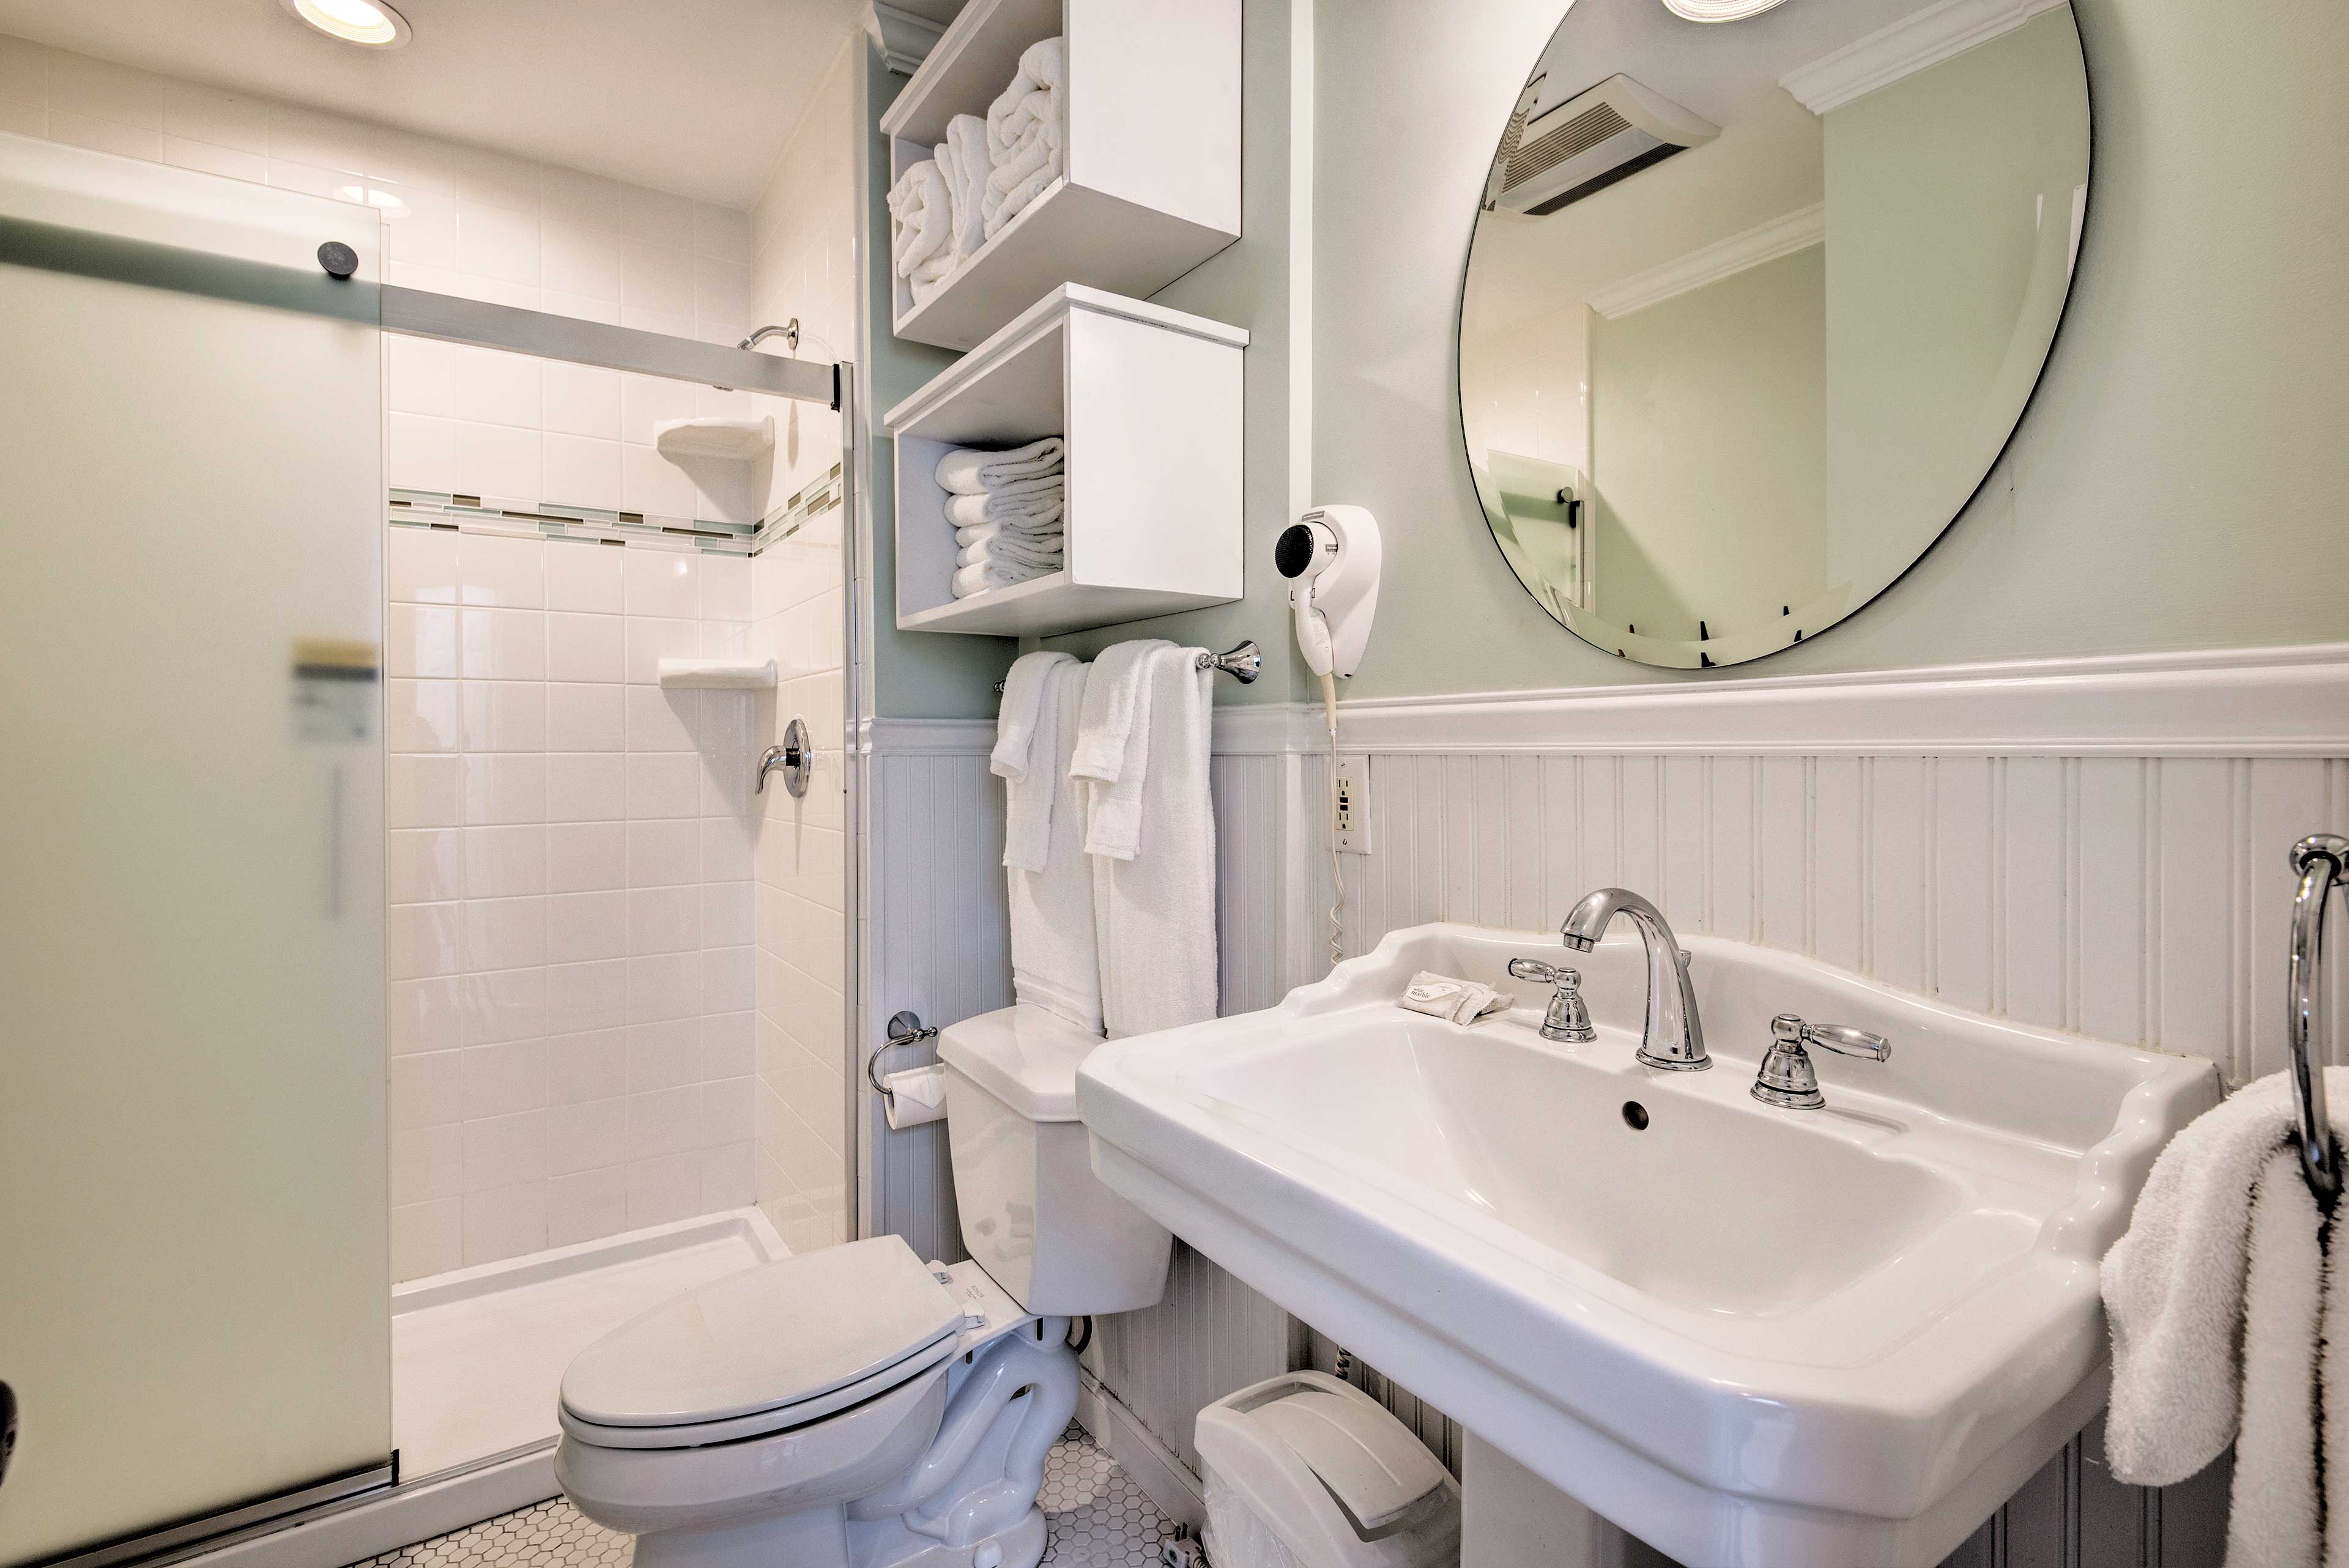 The recently renovated full bath is stocked with plenty of towels for your use.